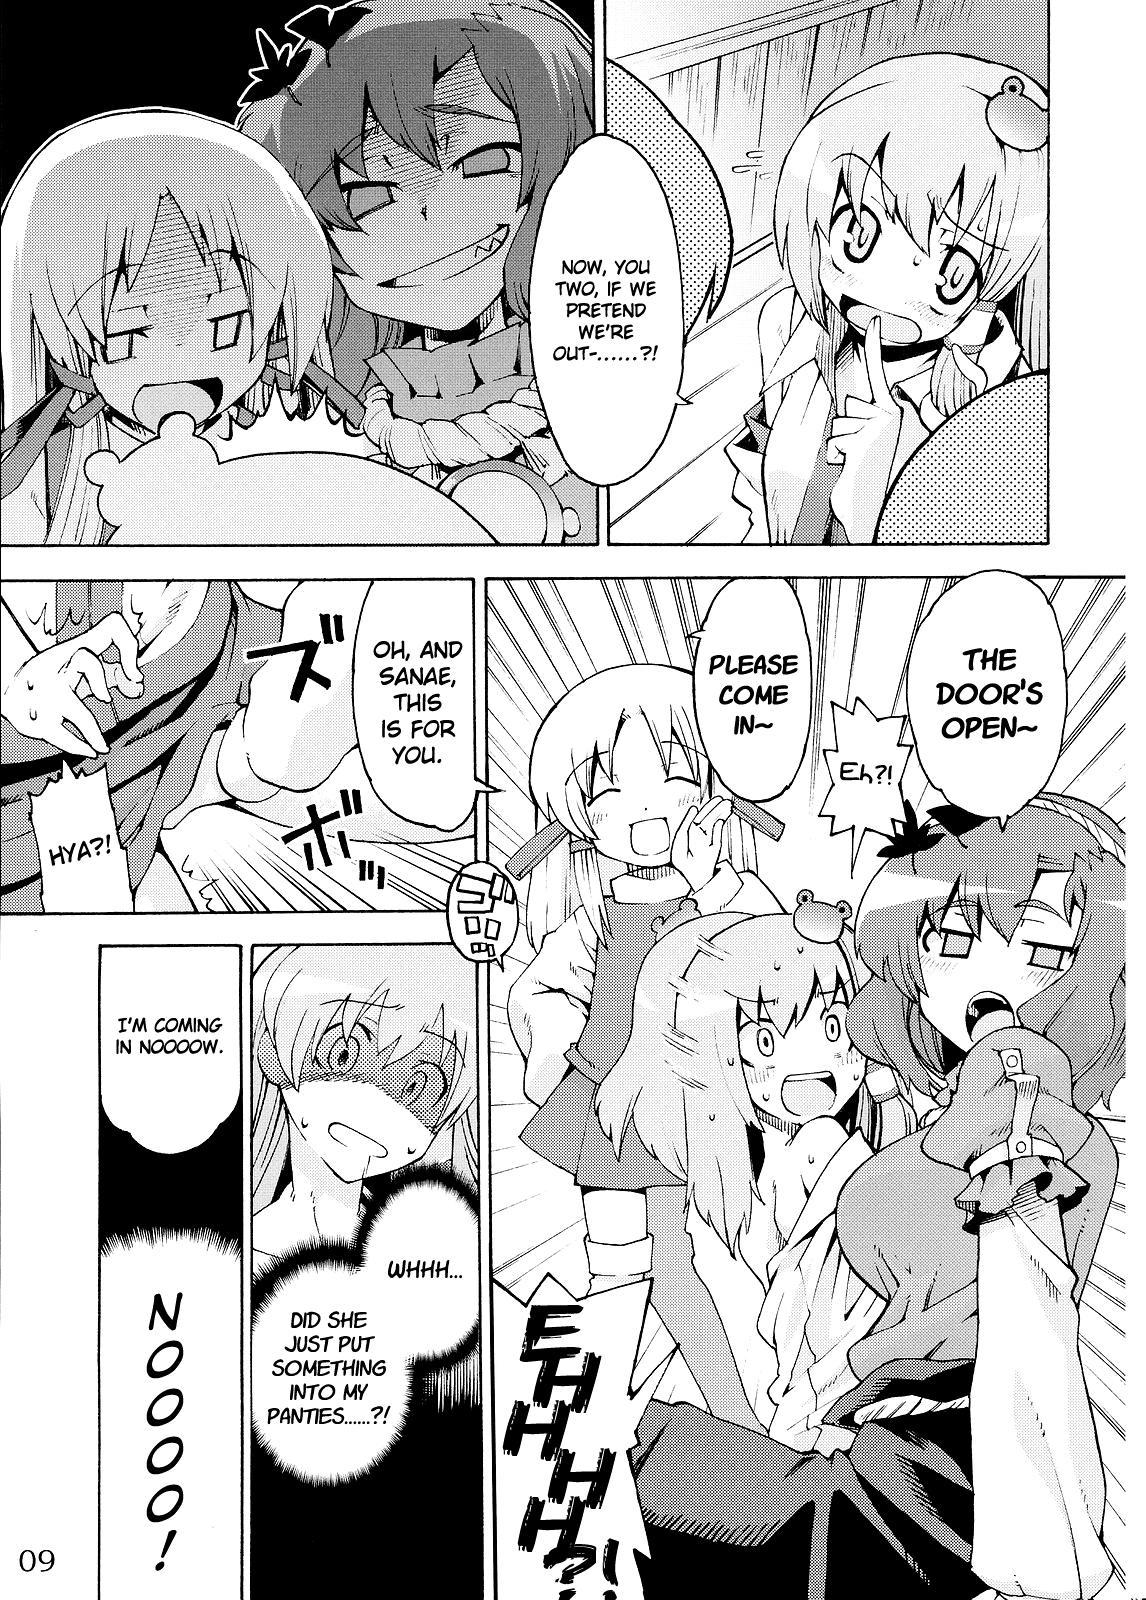 Orgy Kami-sama to Issho! Happy every day! - Touhou project Pissing - Page 9